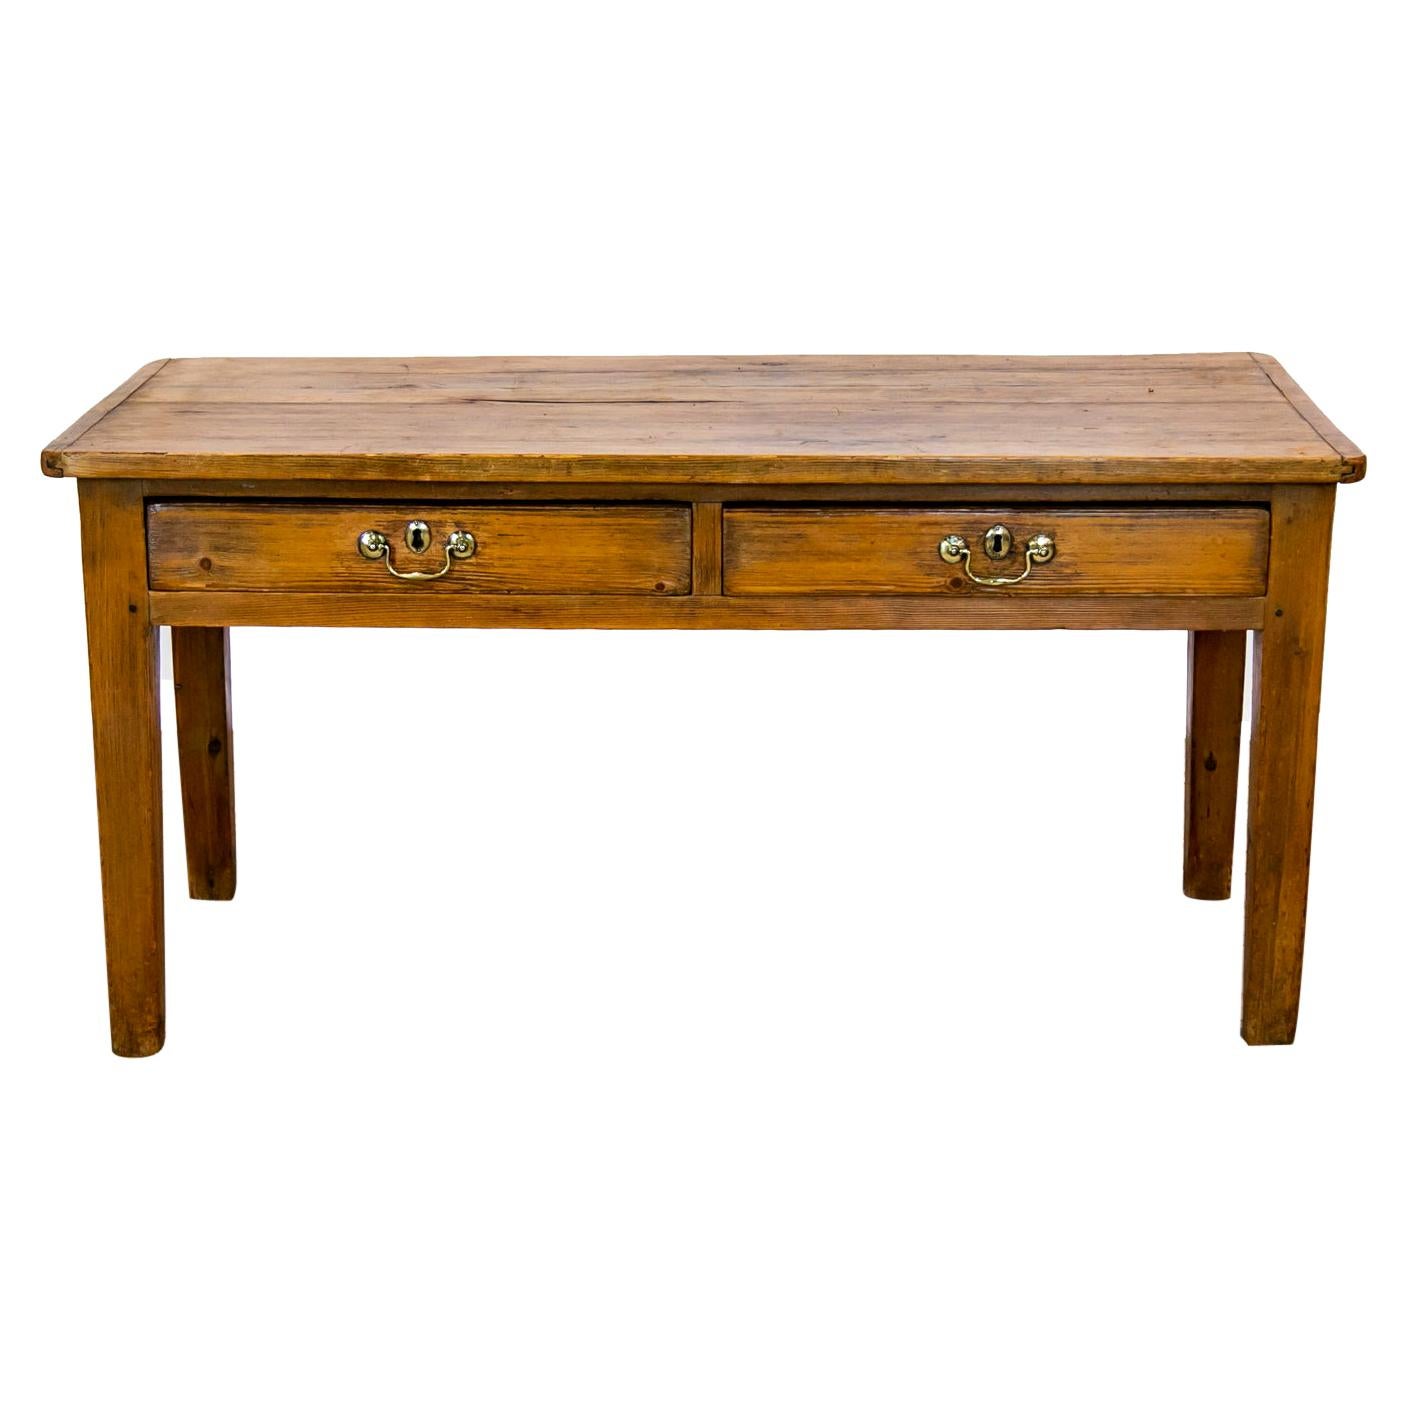 English Pine Two Drawer Serving Table